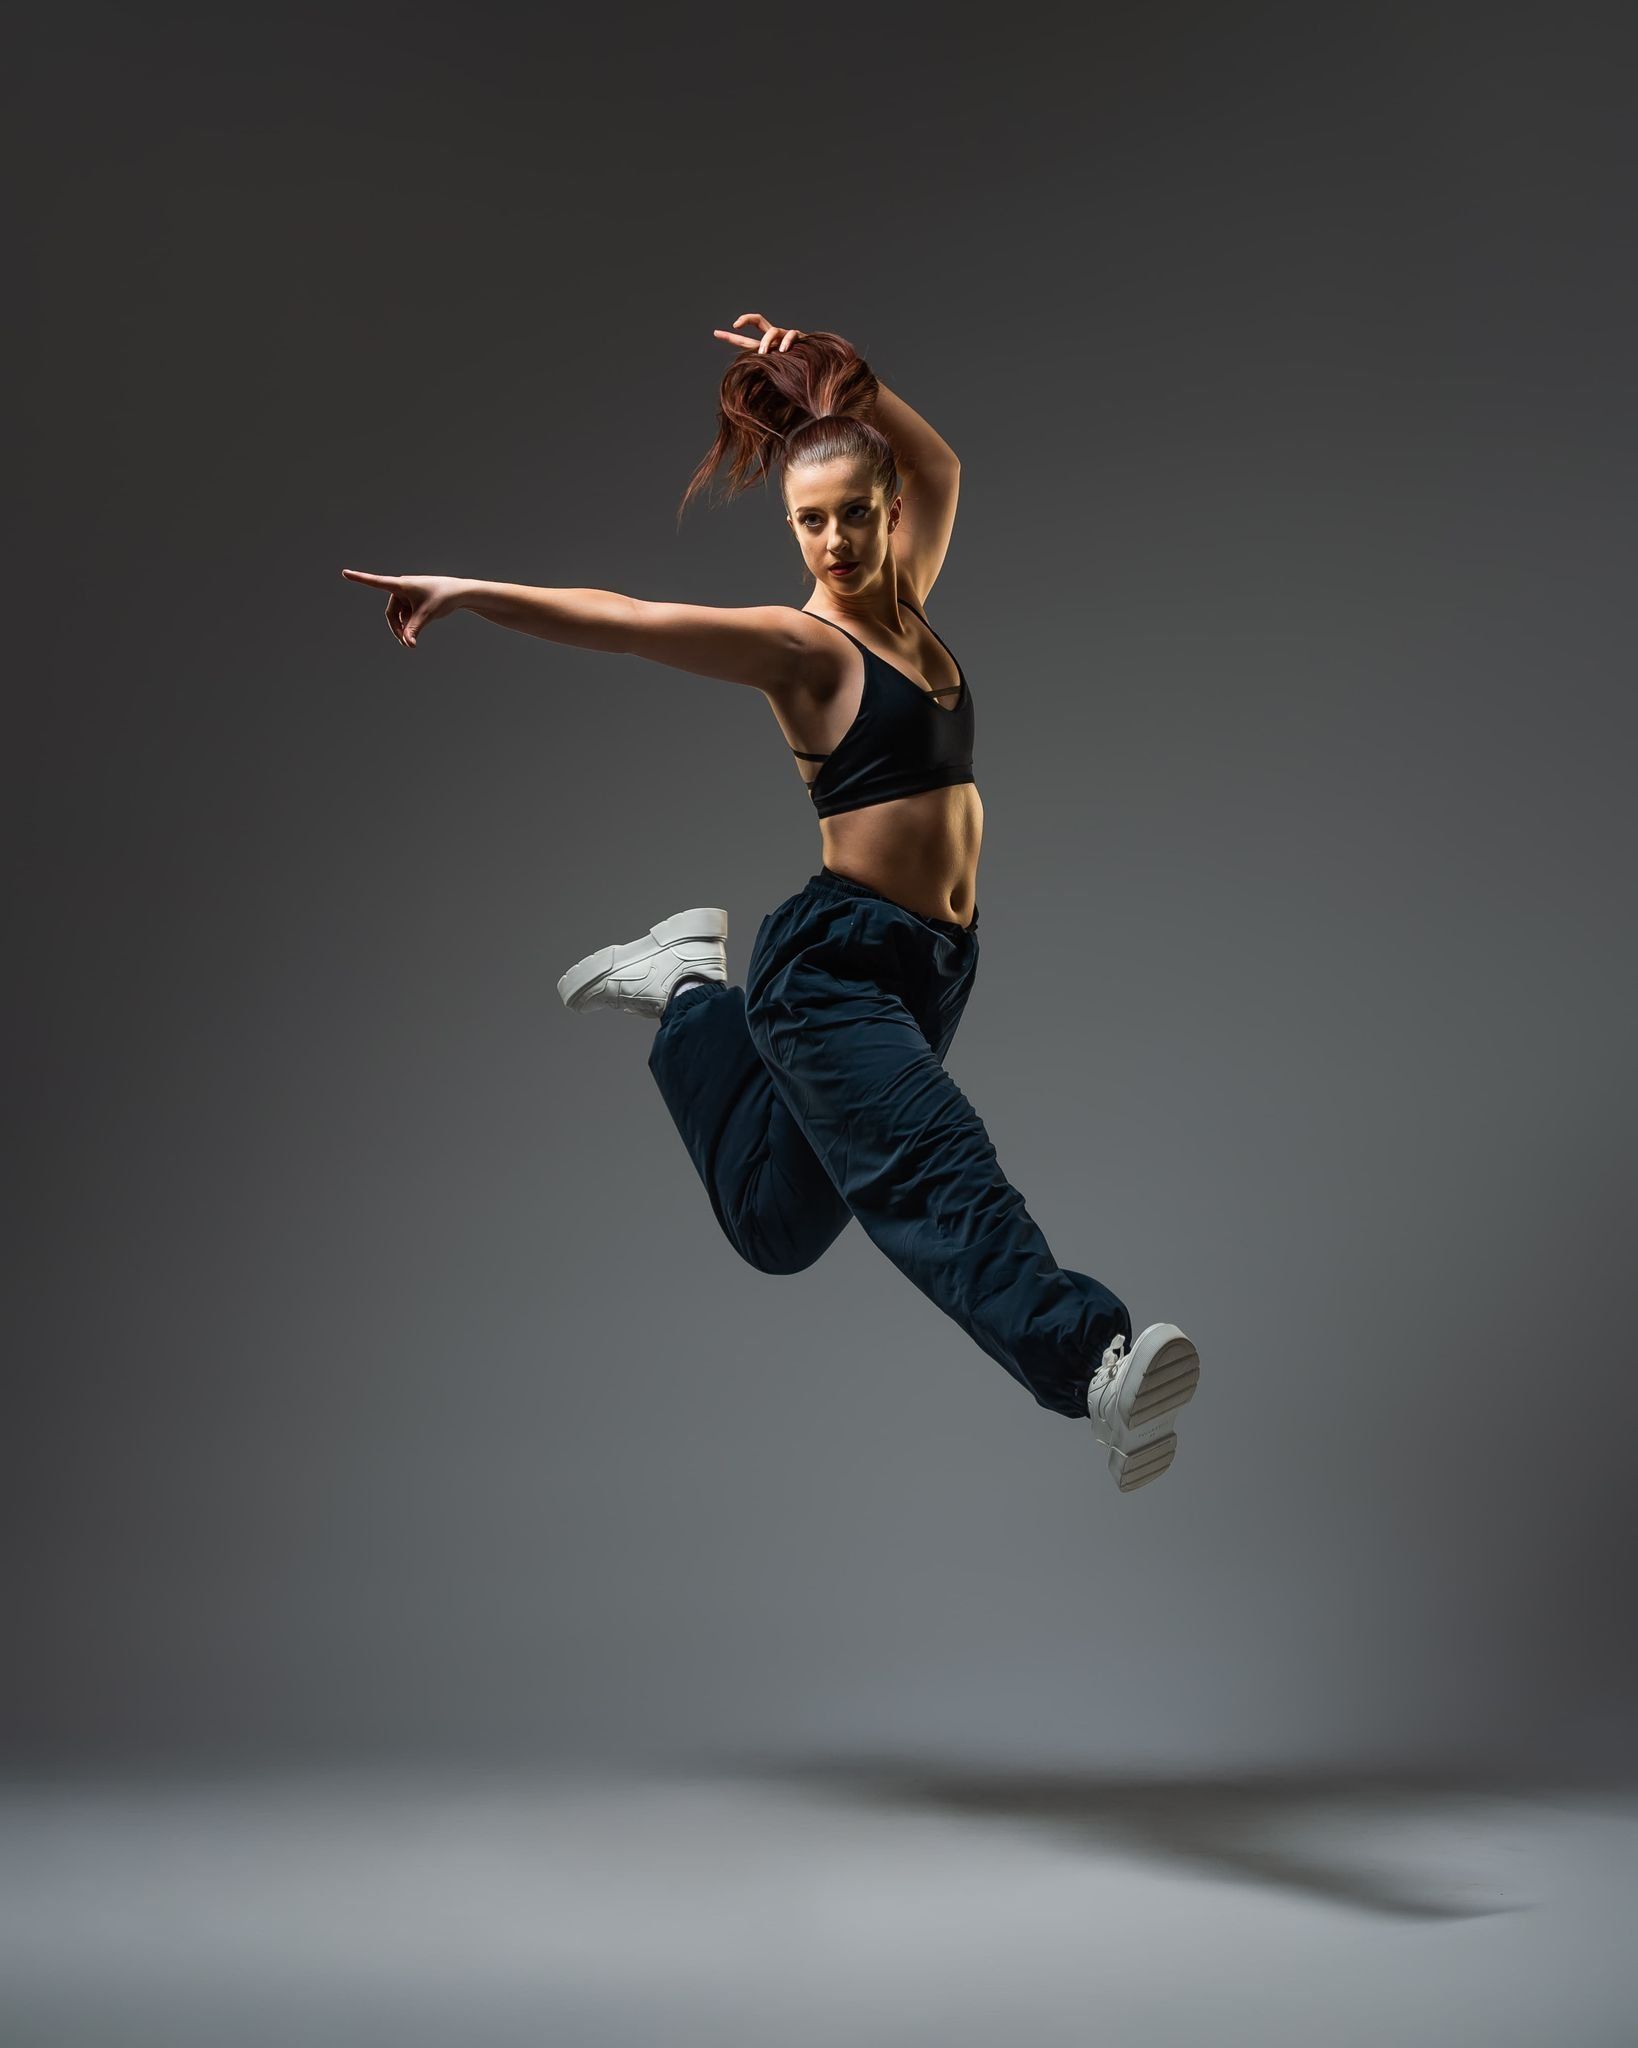 A woman in a black sports bra and sweatpants jumps in the air with her arms outstretched. - Dance